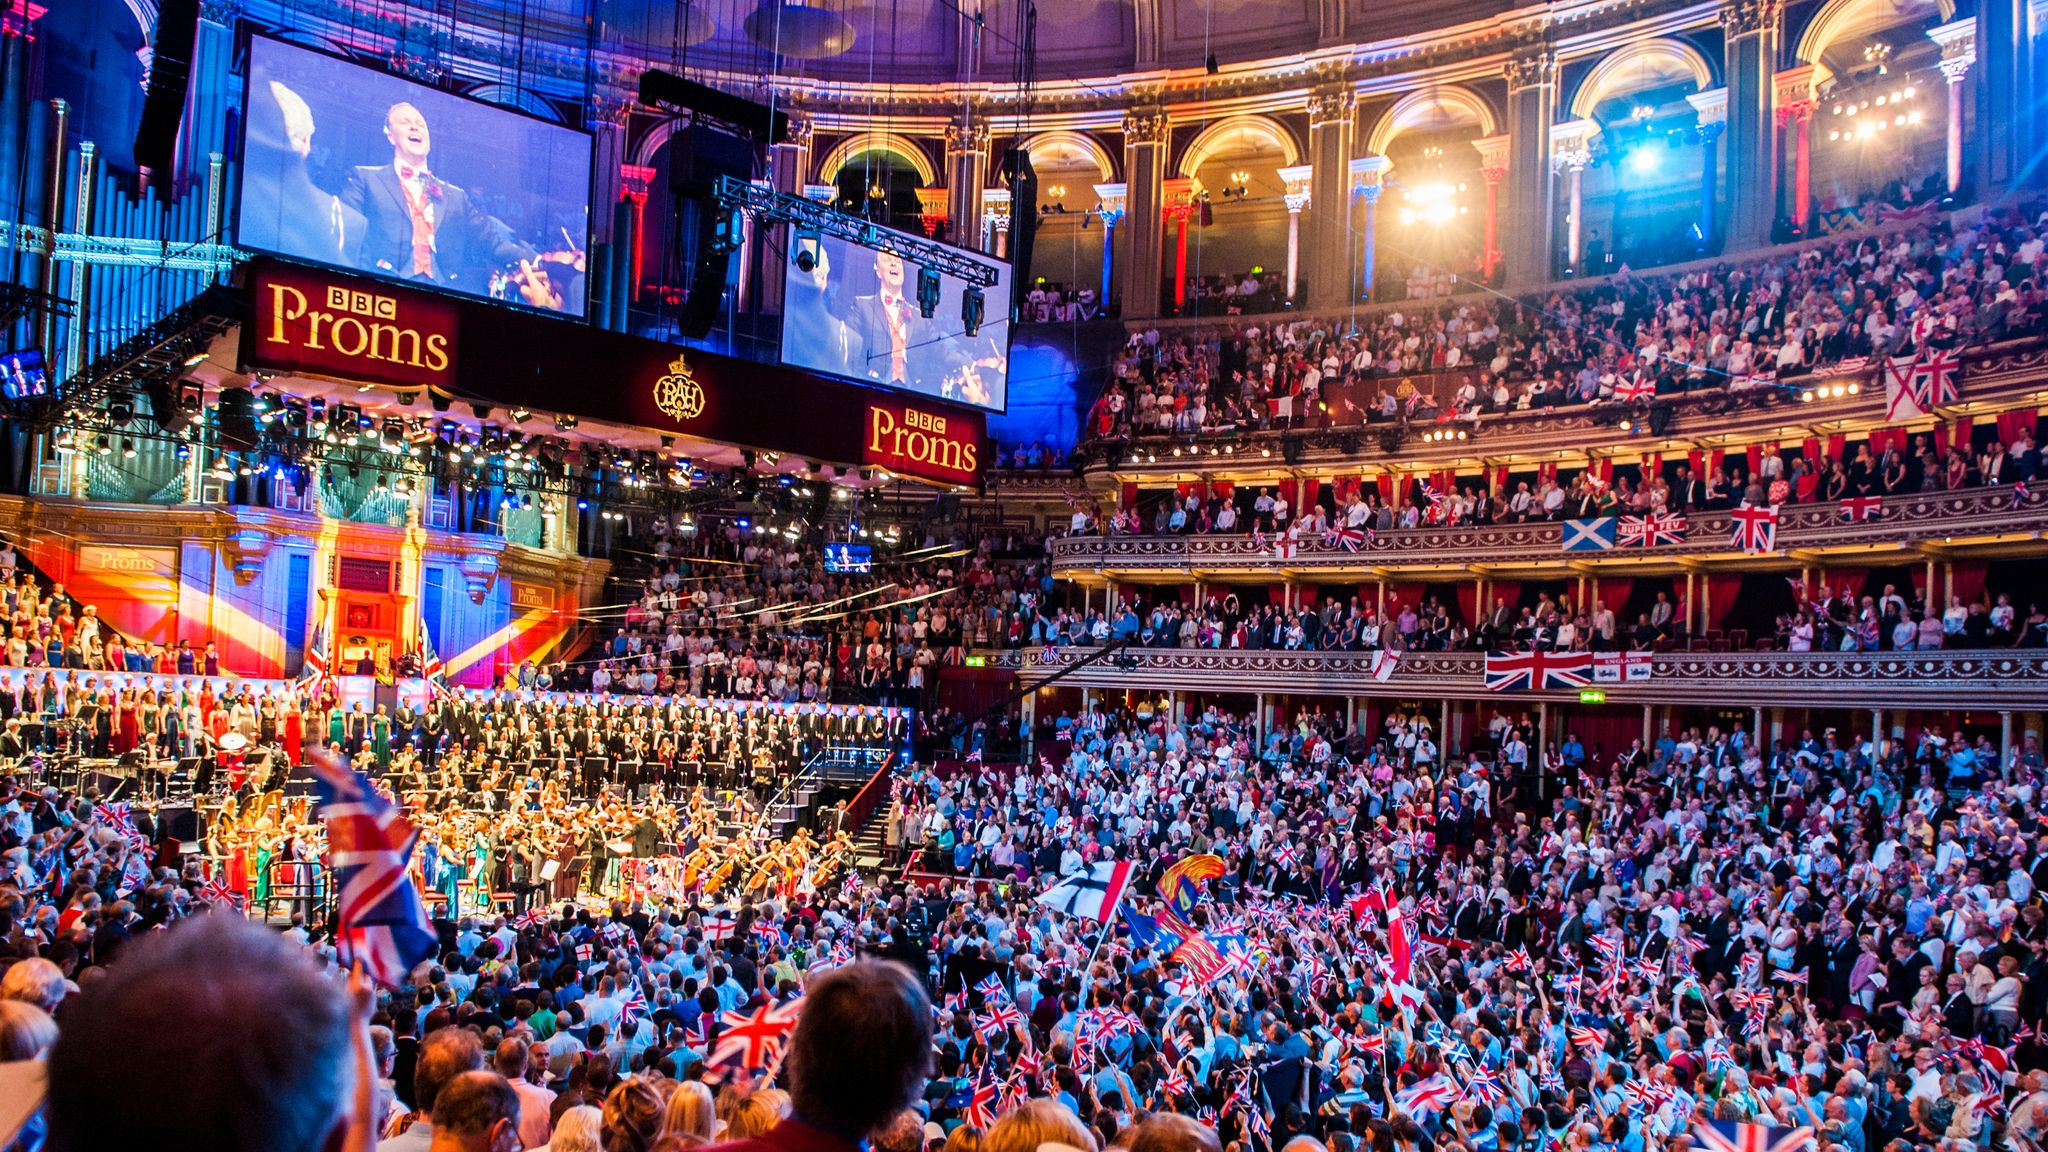 Proms to return to the Royal Albert Hall along with an audience and